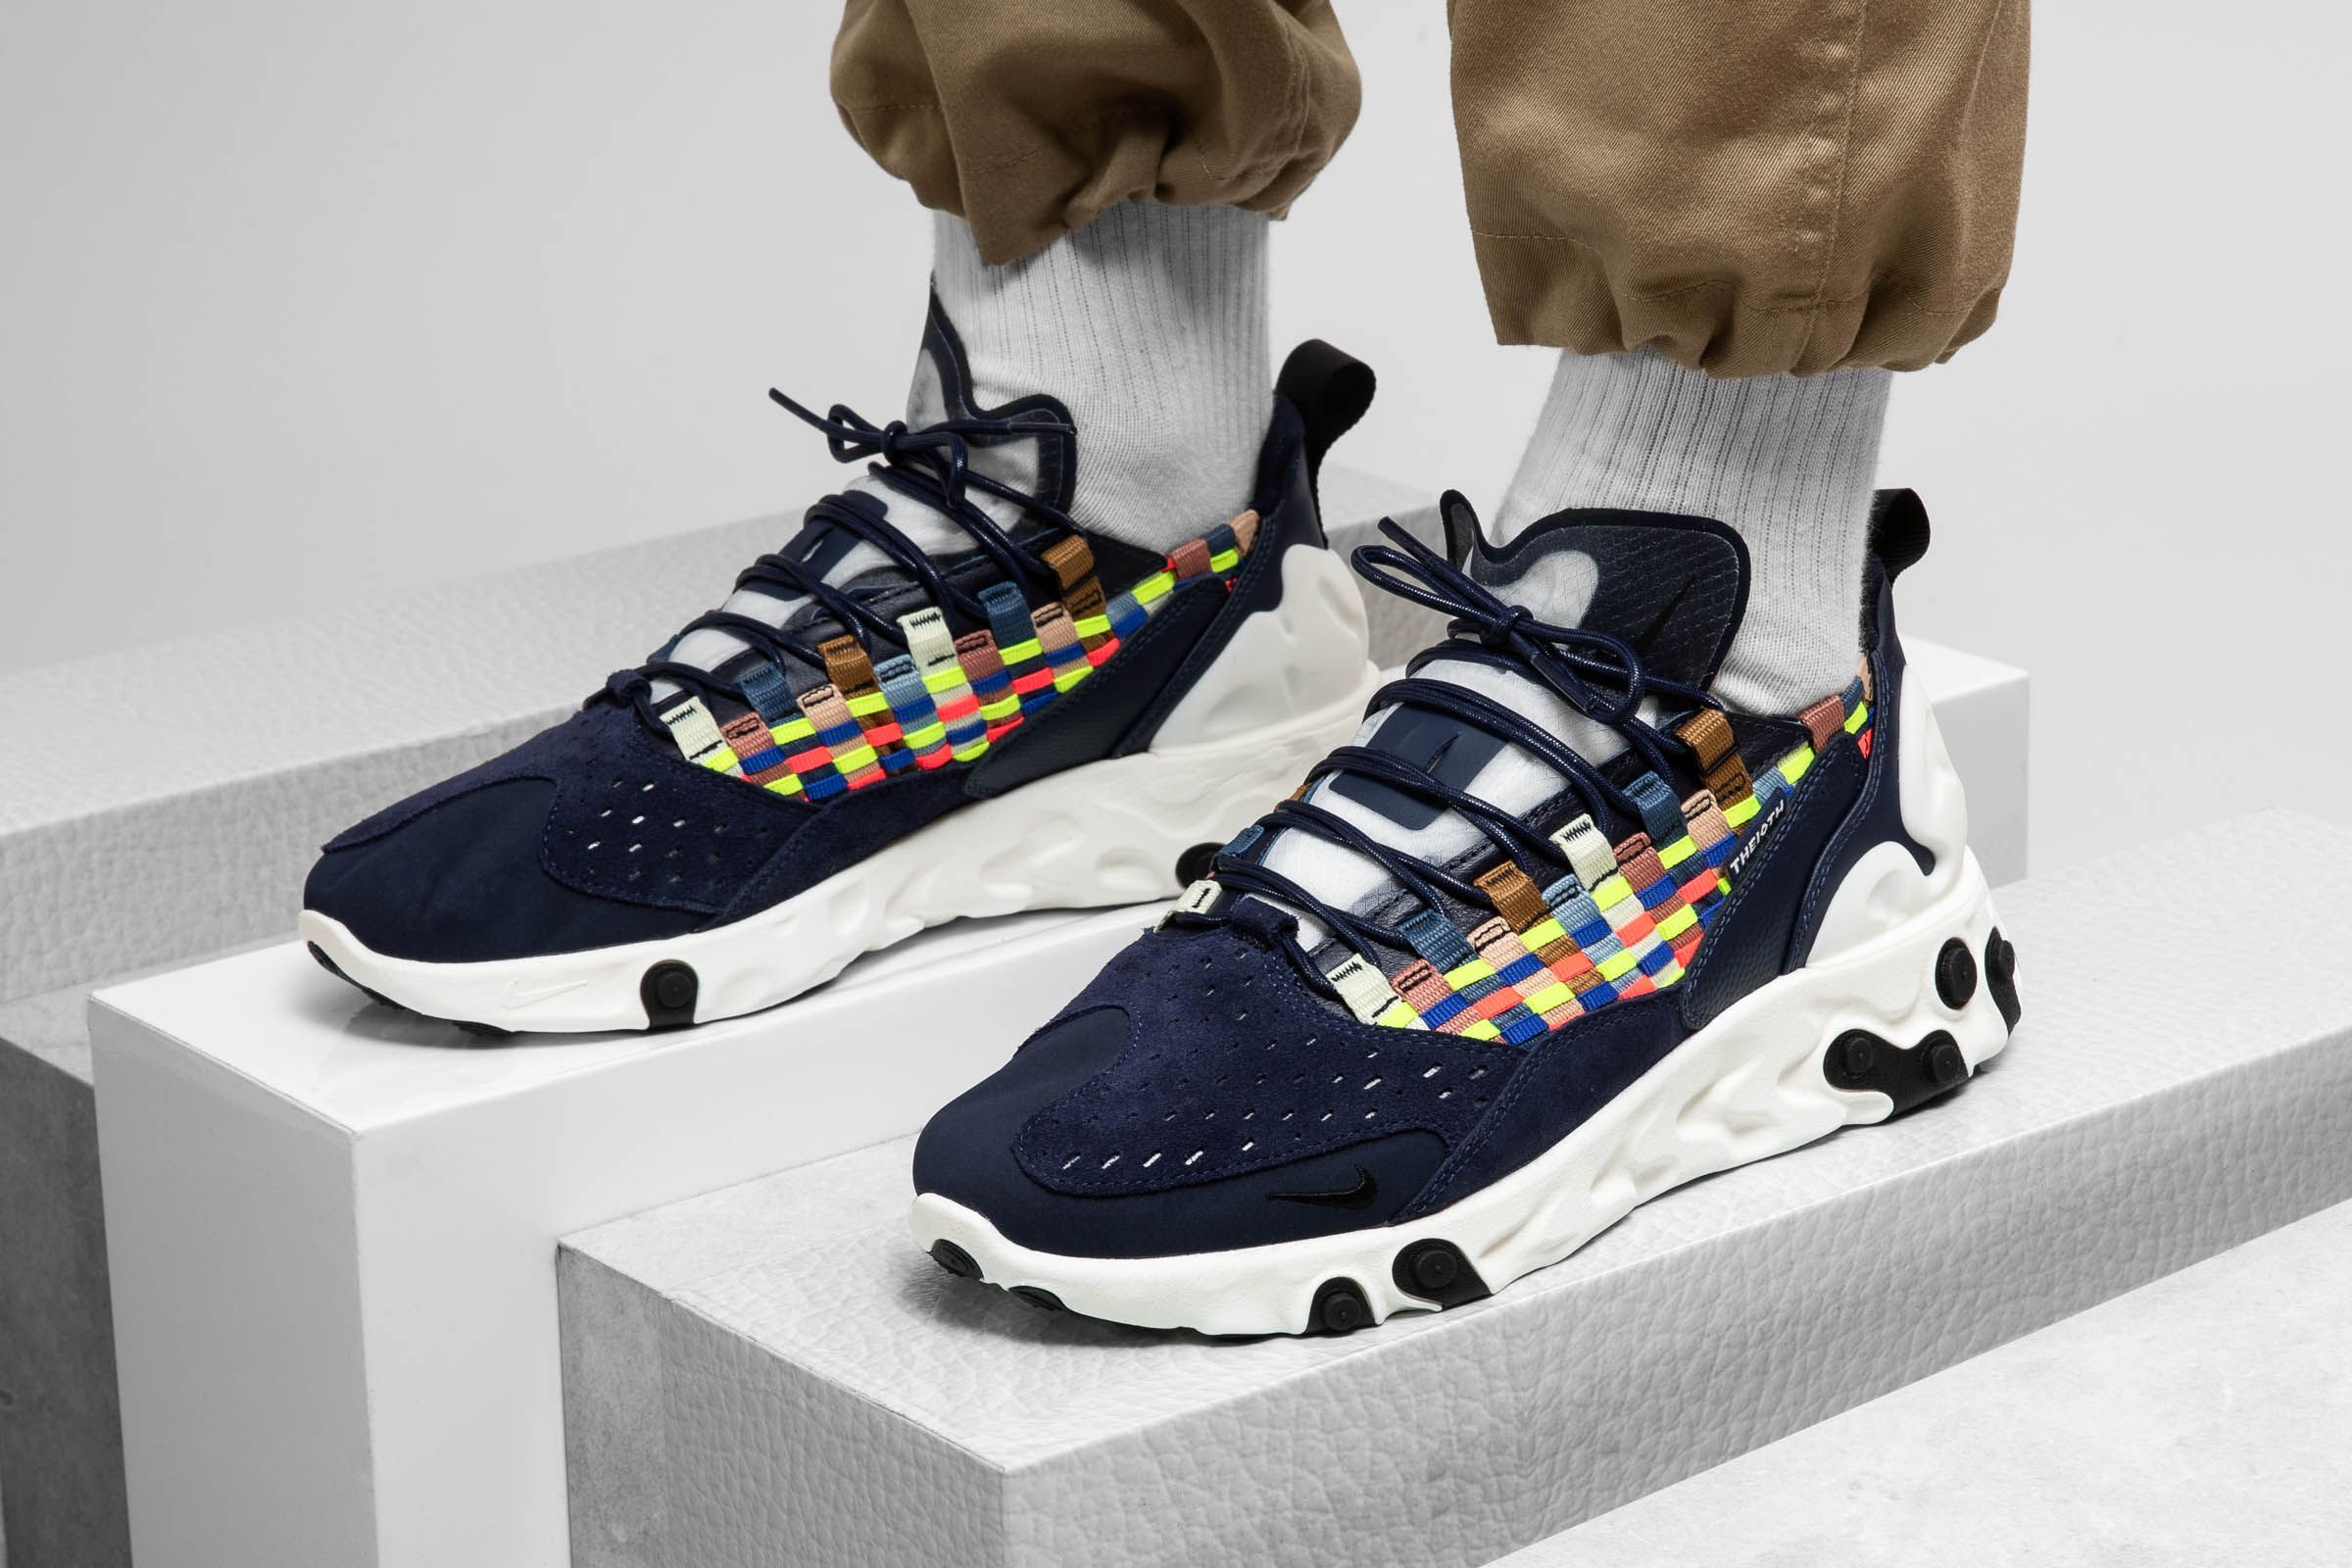 schotel Afleiding Logisch Titolo on Twitter: "the latest Nike React Sertu comes in blackened blue and  colorful woven uppers. shop ➡️ https://t.co/Hr5Jw5TF1p or in store at  Titolo Zurich and Titolo Berne. US 7 (40) -